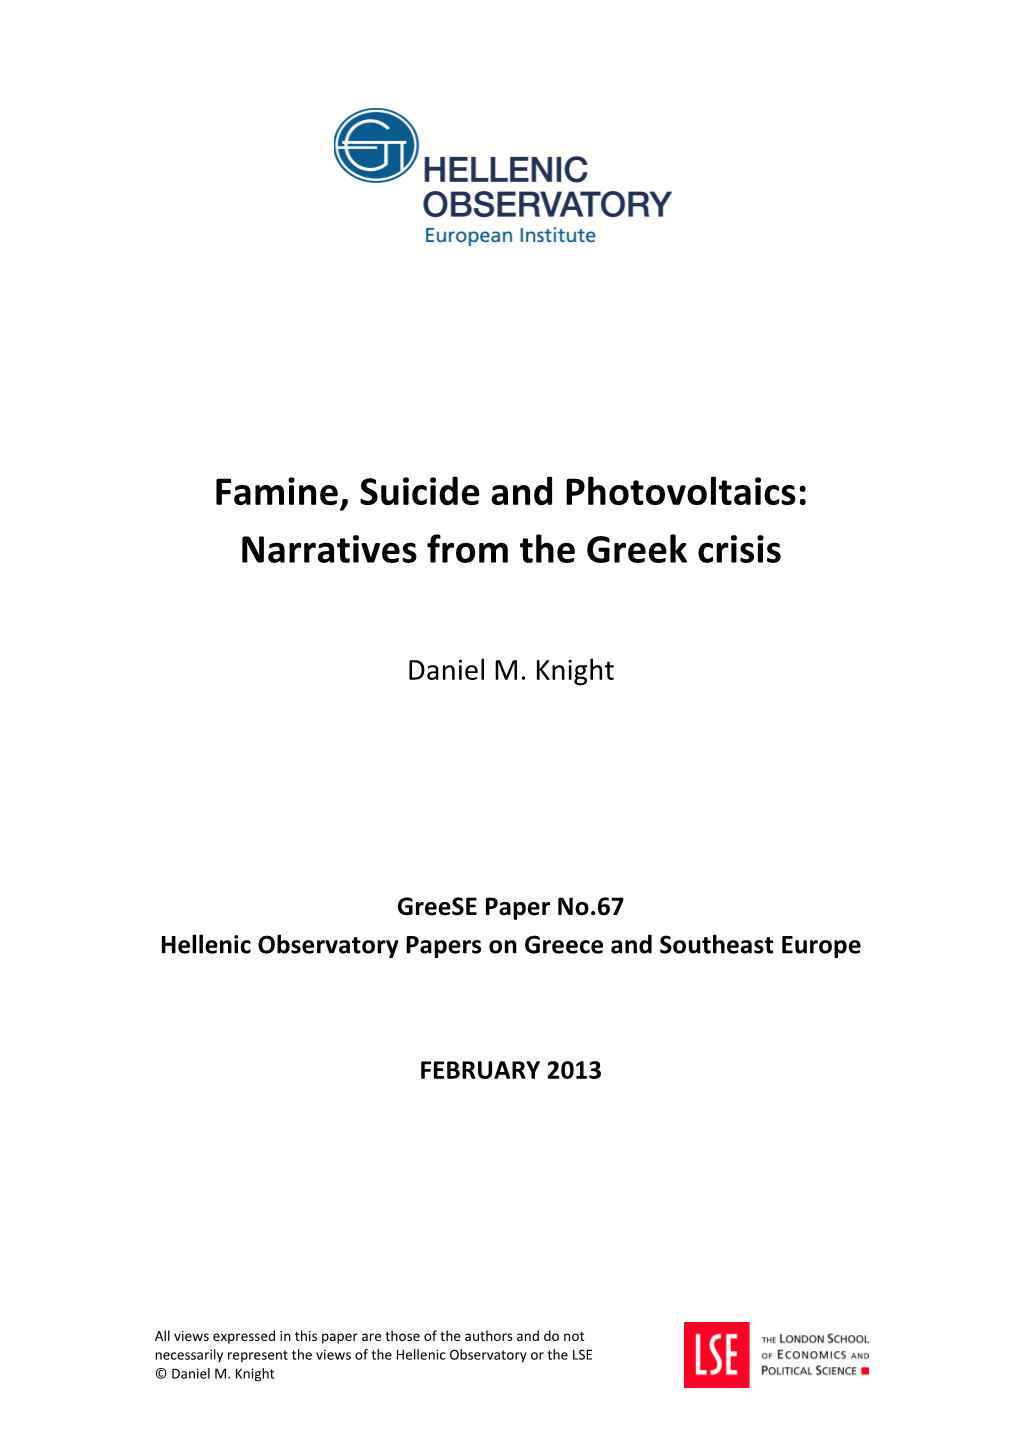 Famine, Suicide and Photovoltaics: Narratives from the Greek Crisis